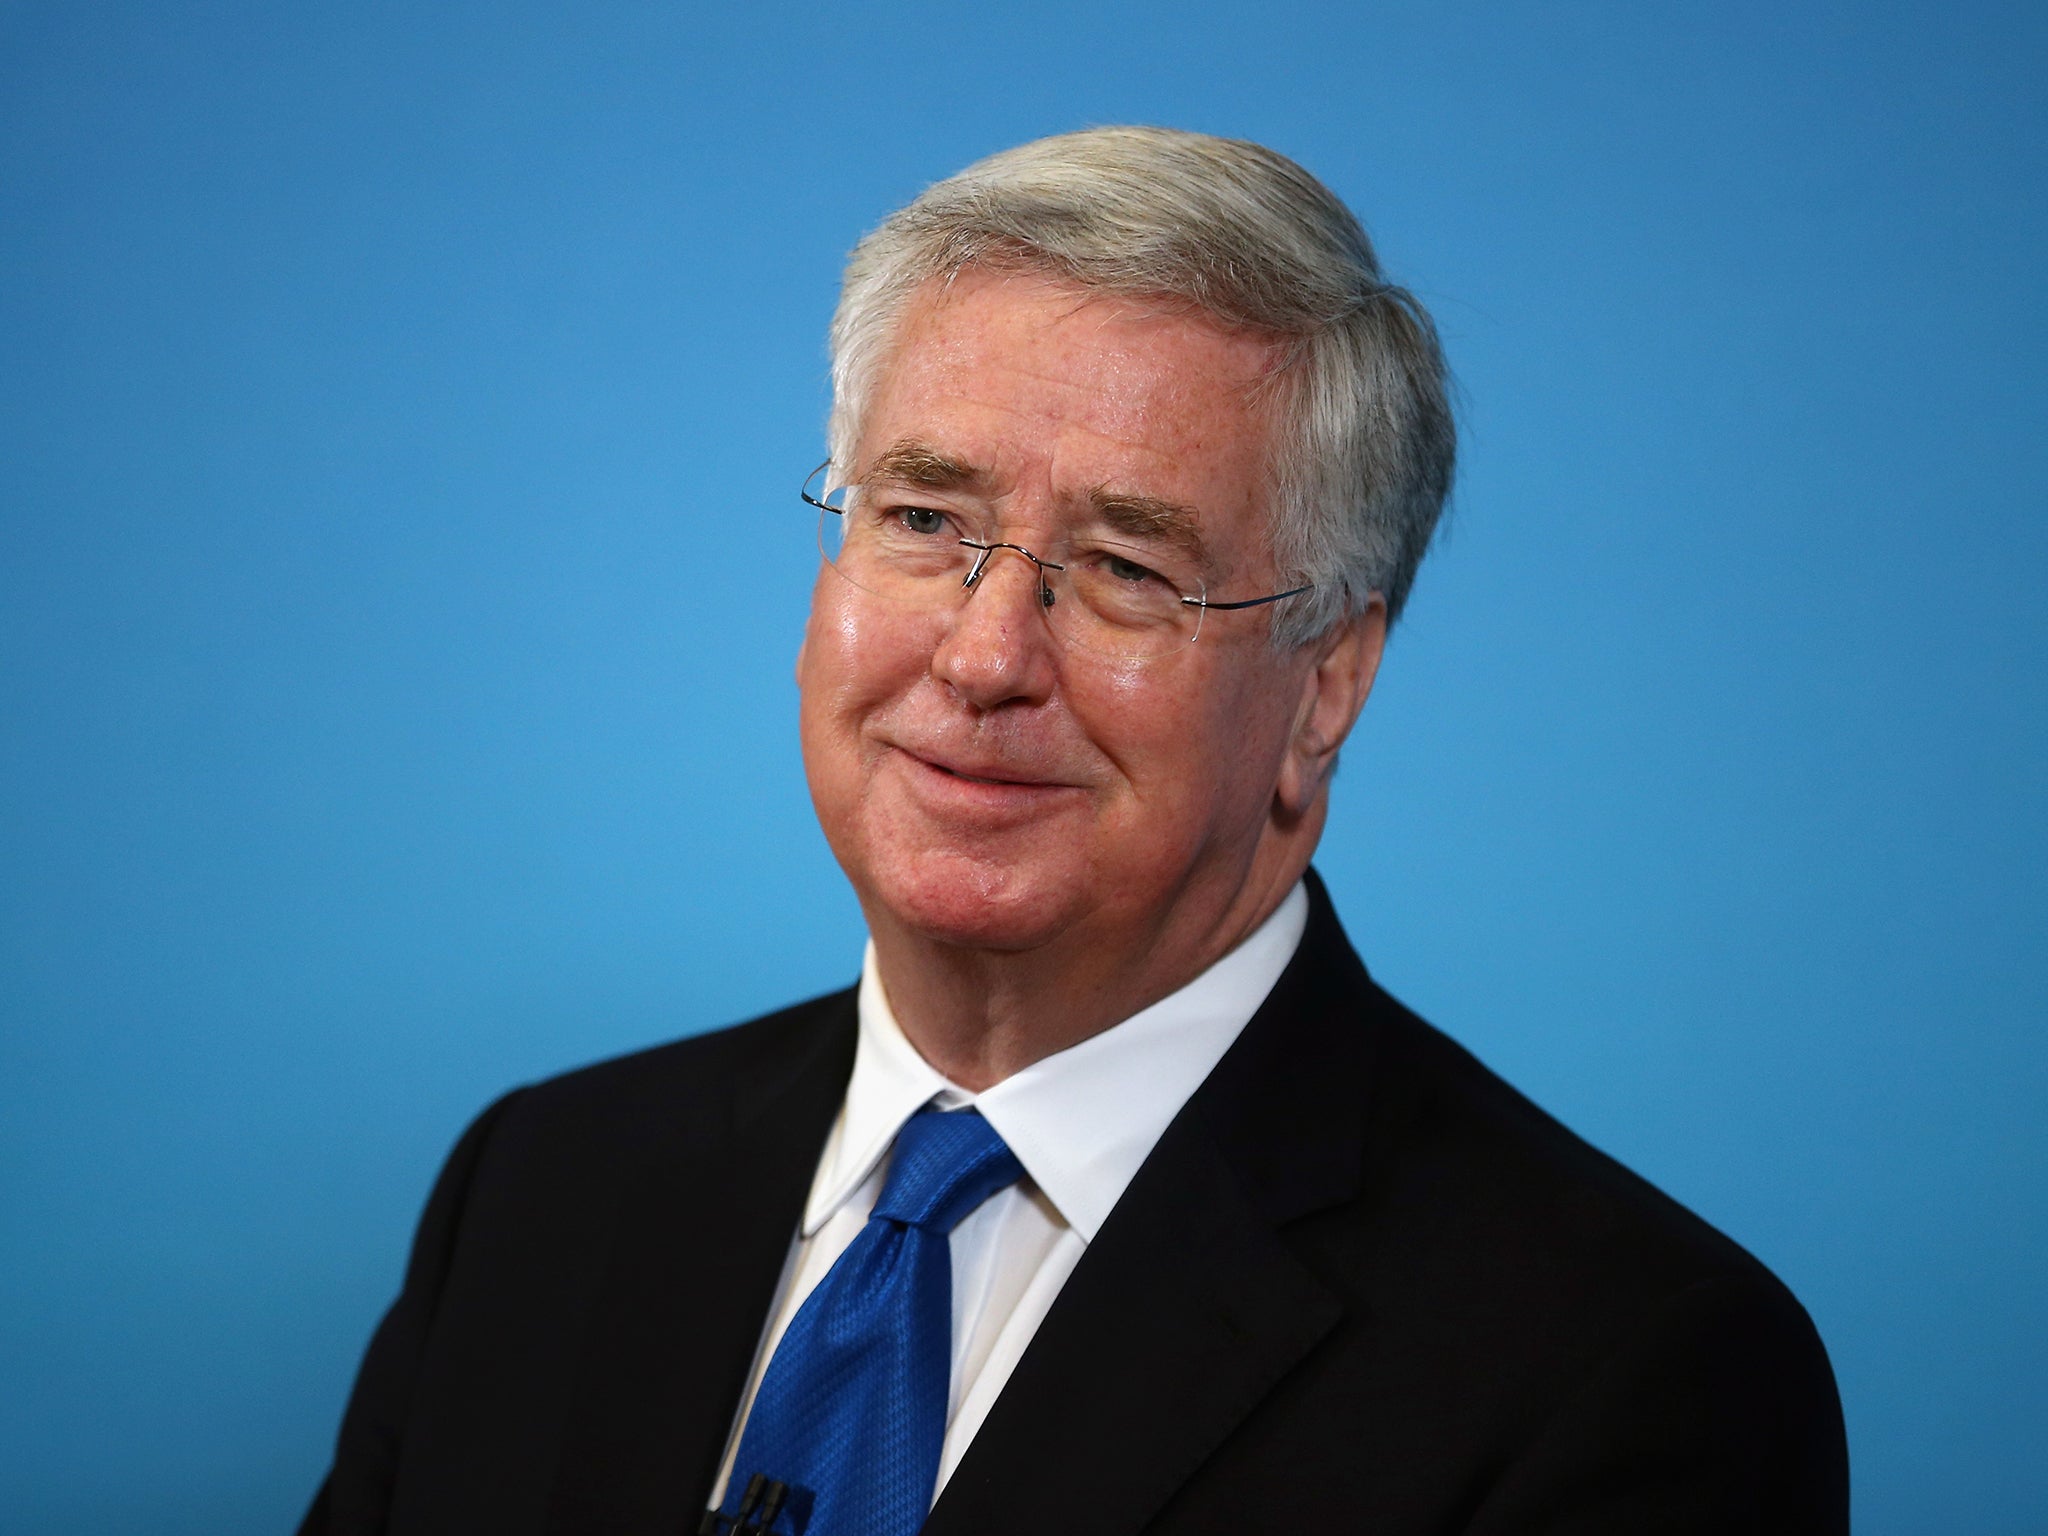 Michael Fallon’s comments came when he was asked by a Tory candidate how best to justify the policy